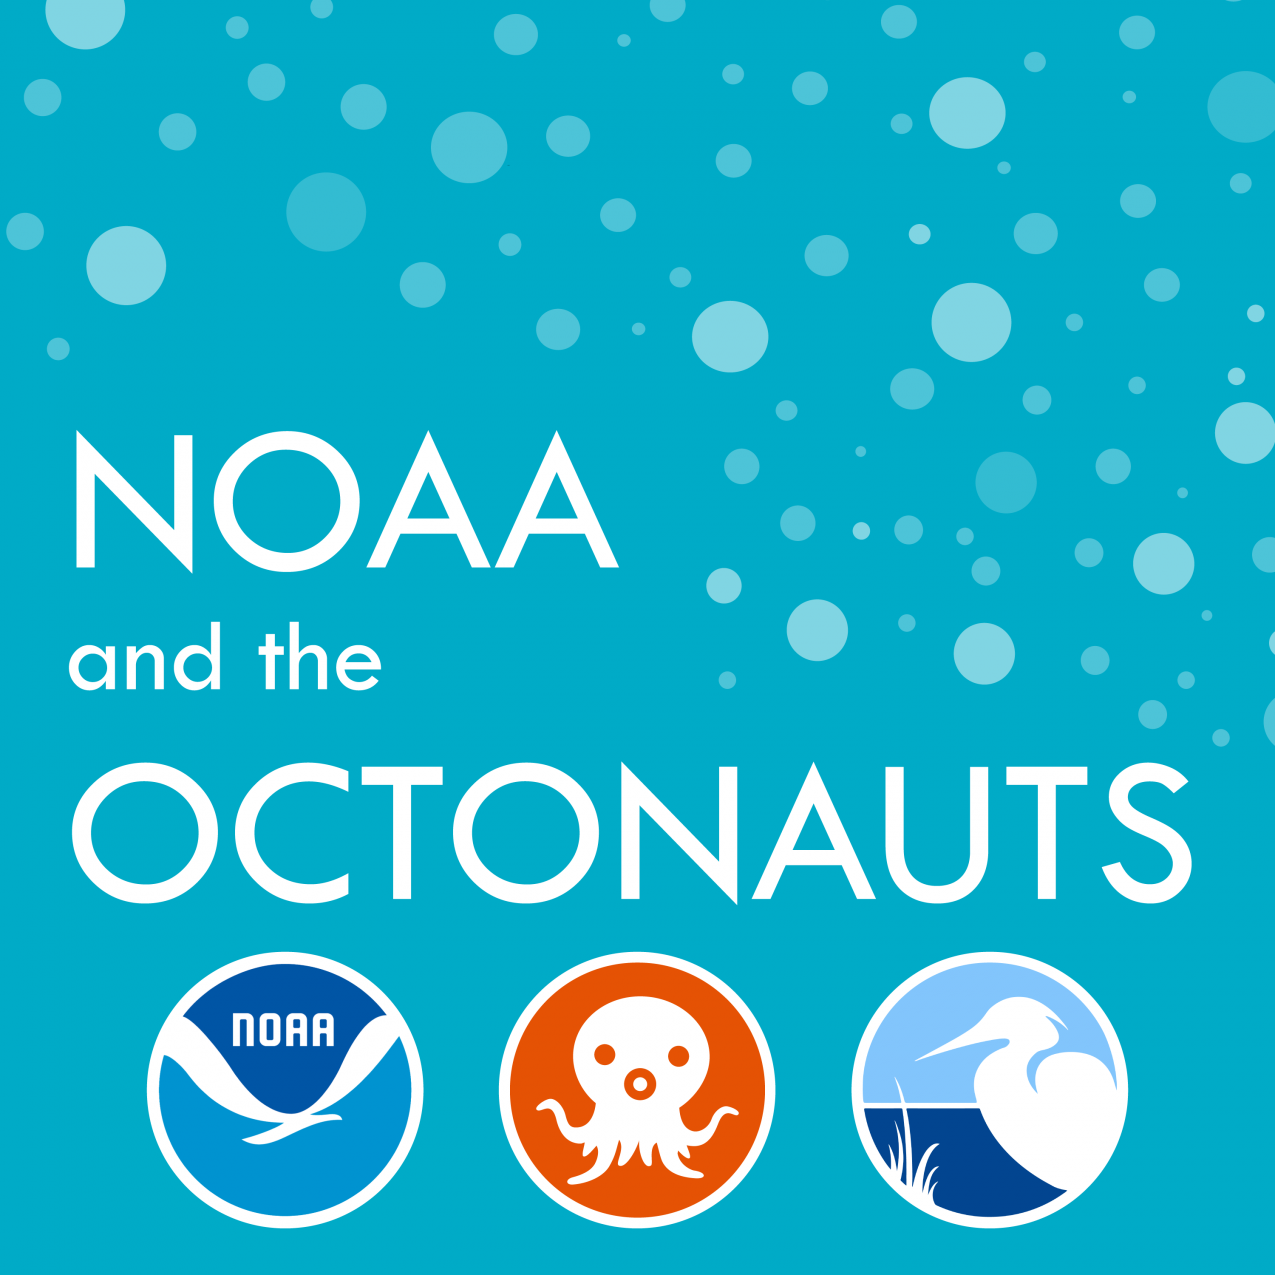 This is the logo for "NOAA and the Octonauts," a podcast from NOAA's Office of Education and the Coastal Ecosystem Learning Center (CELC) Network. This podcast dives into the science behind the children’s TV show The Octonauts, which features a crew of quirky and courageous undersea adventurers. Their mission: to explore the world’s ocean, rescue the creatures who live there, and protect their habitats. Our monthly podcast brings together experts from inside and outside of NOAA to help parents,